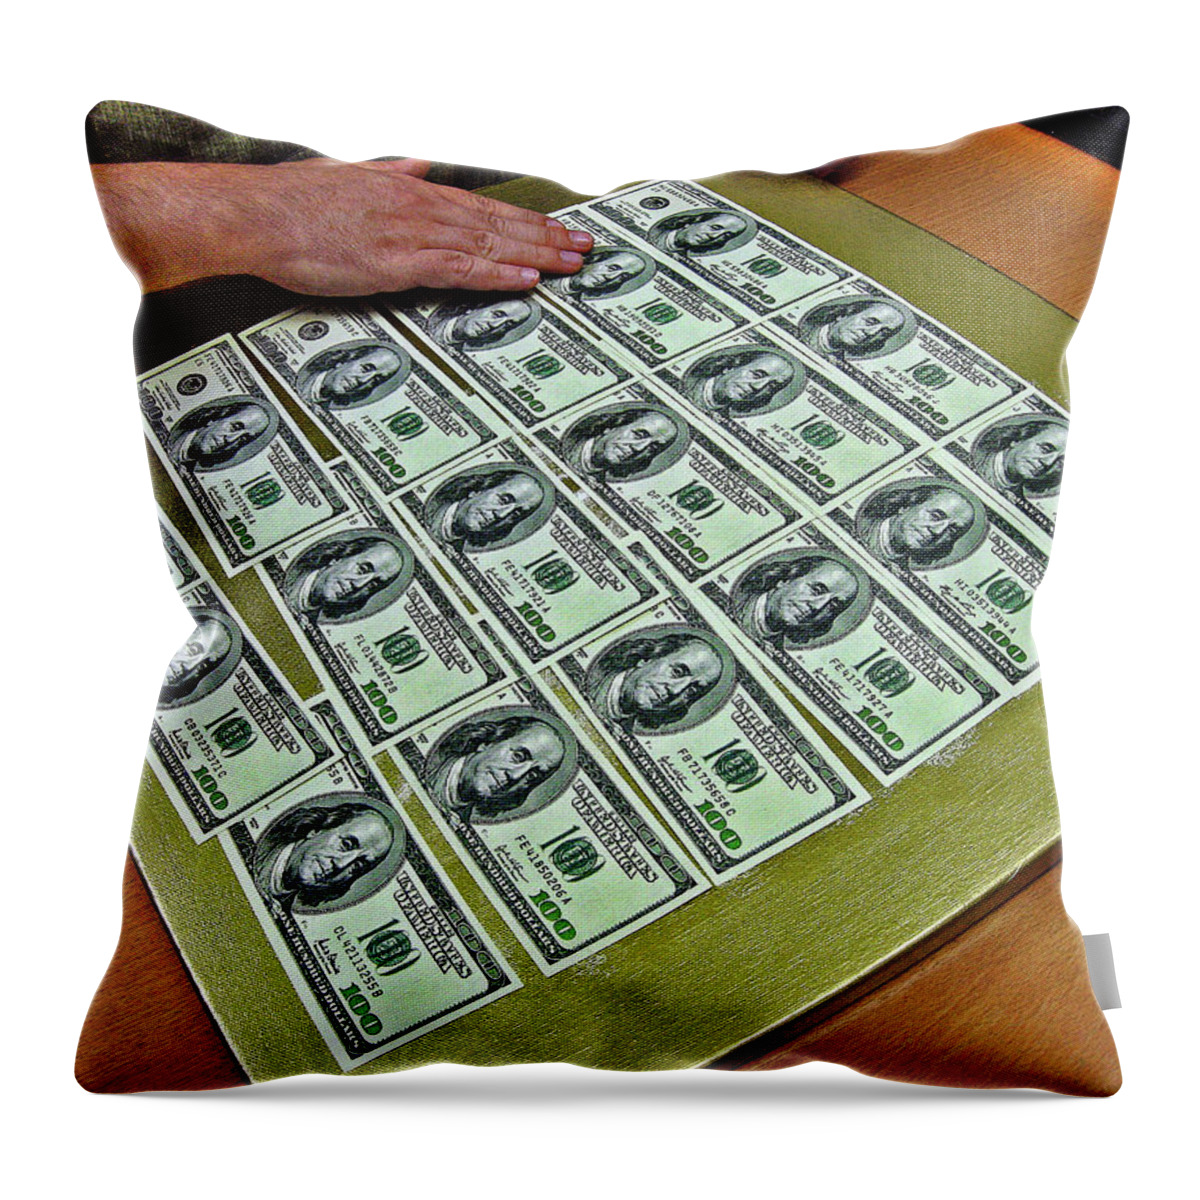 Artist's Studio Throw Pillow featuring the digital art In The Artist's Studio. #1 by Andy i Za